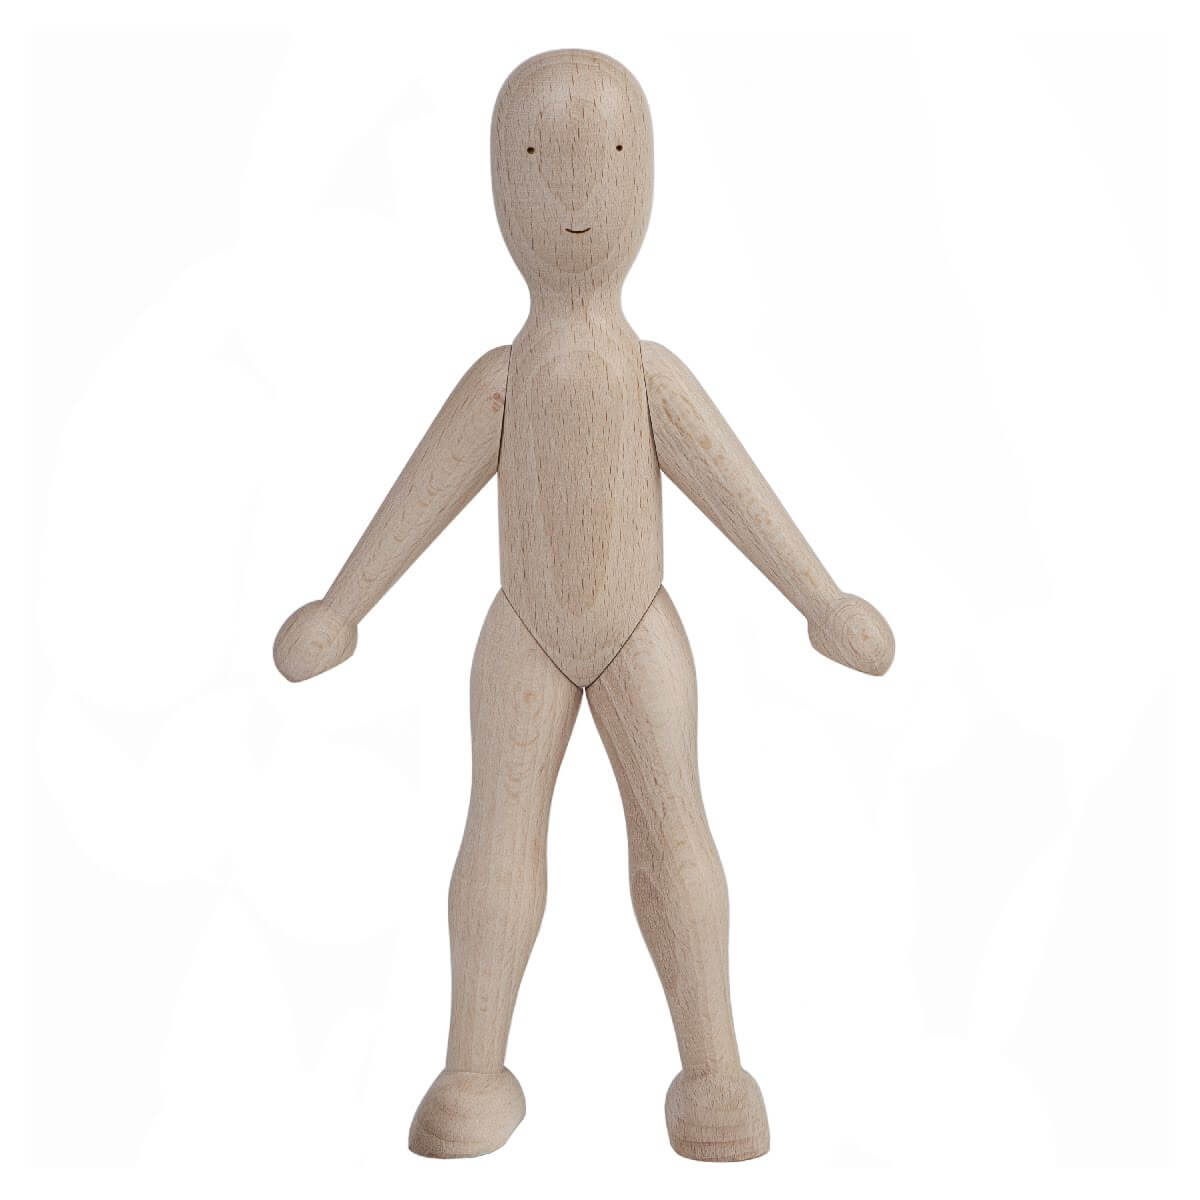  Wooden story toy lala wooden doll at blue brontide uk